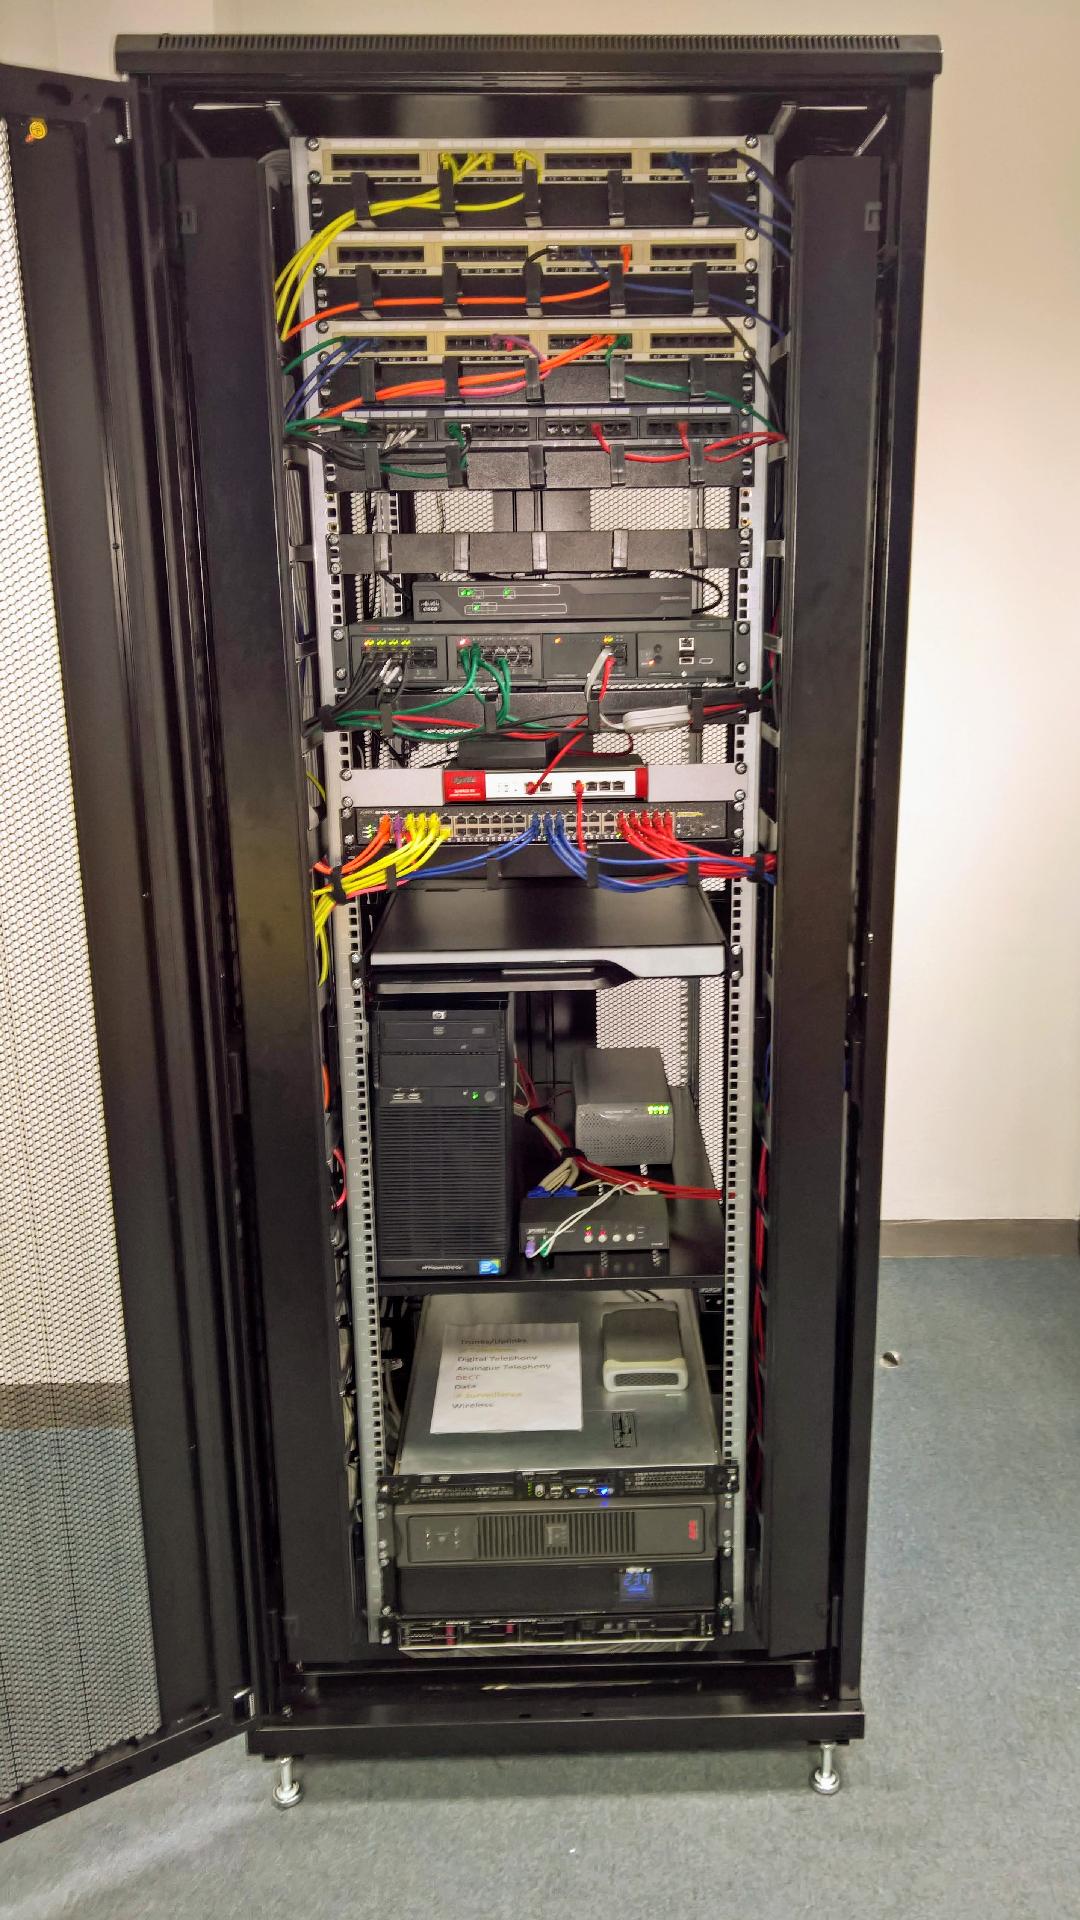 7 tips for keeping a data cabinet tidy